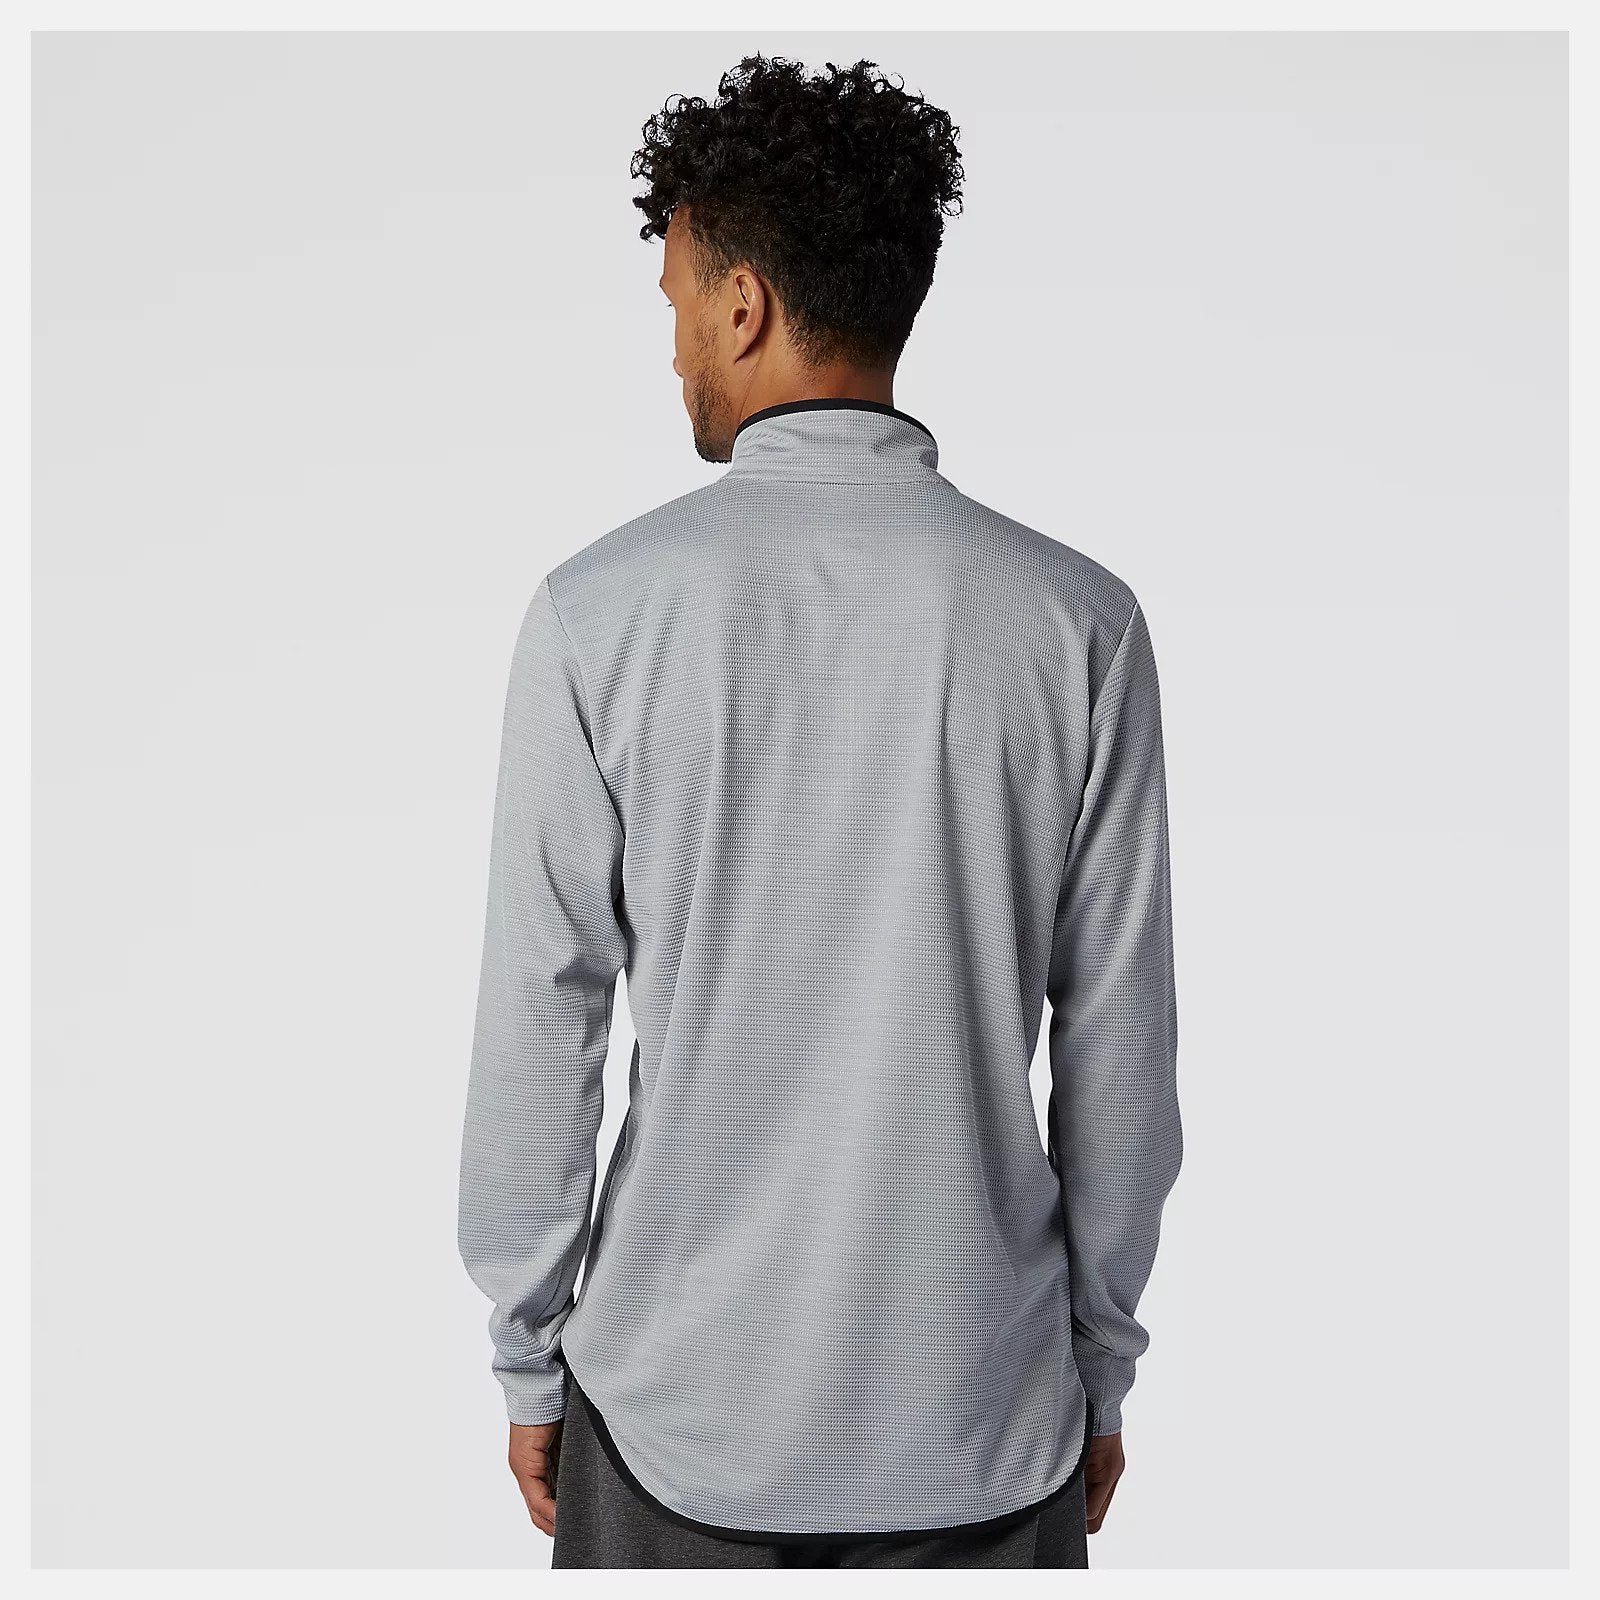 Back view of a model wearing the Men's Tenacity Quarter Zip by New Balance in the color Athletic Grey